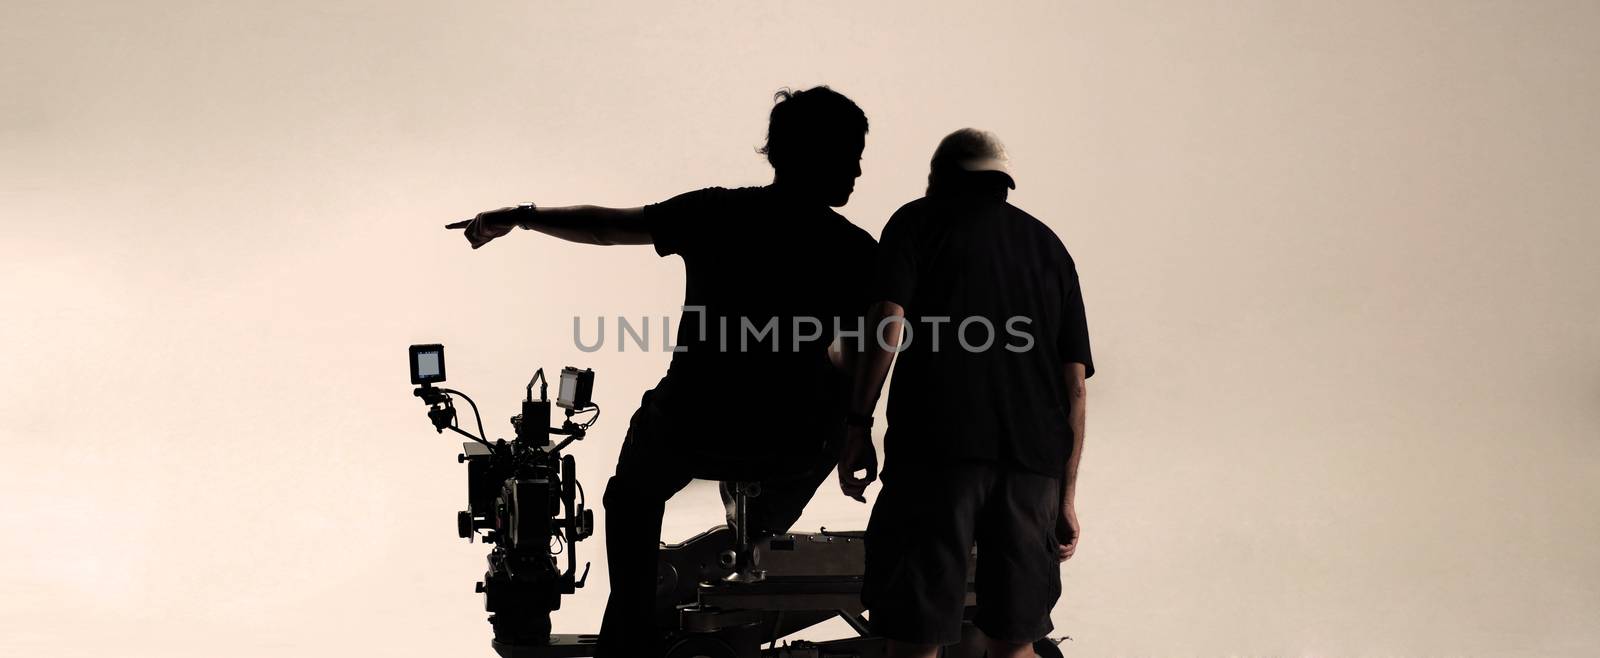 Silhouette behind the scenes of camera man. by gnepphoto